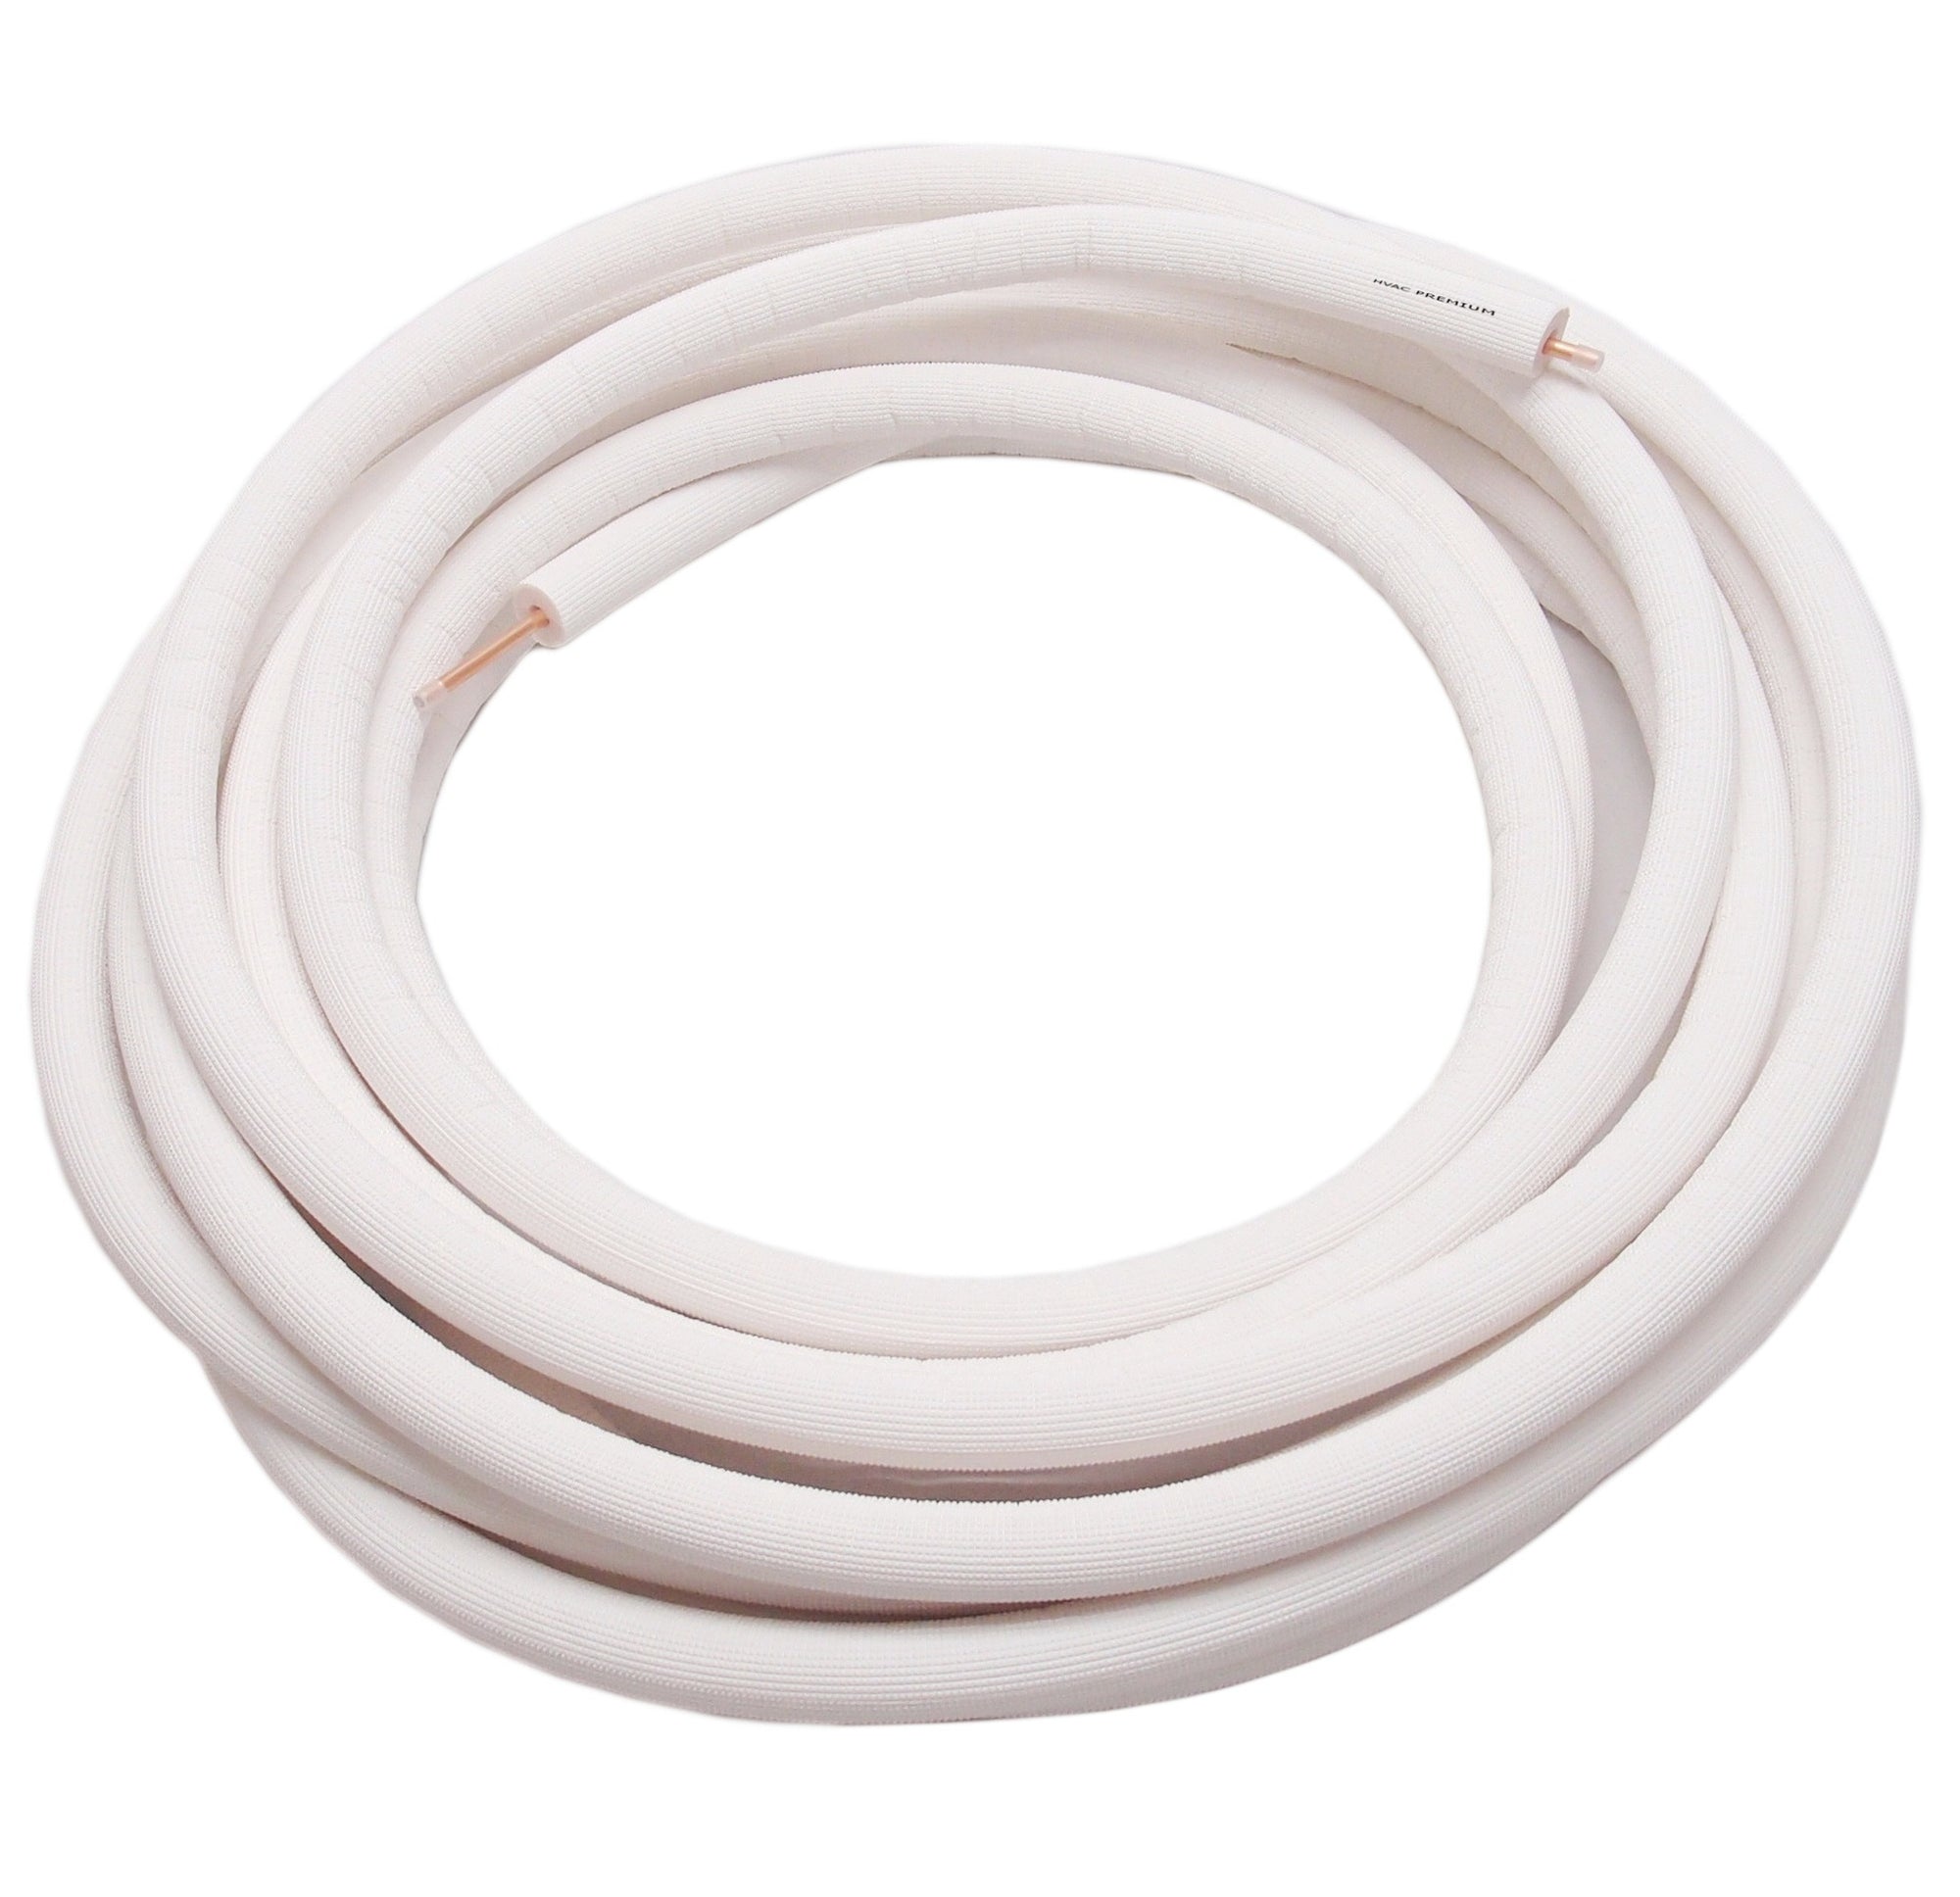 3/8" Insulated Copper Coil Line - Seamless Pipe Tube for HVAC, Refrigerant - 1/2" White Insulation - 25' Long